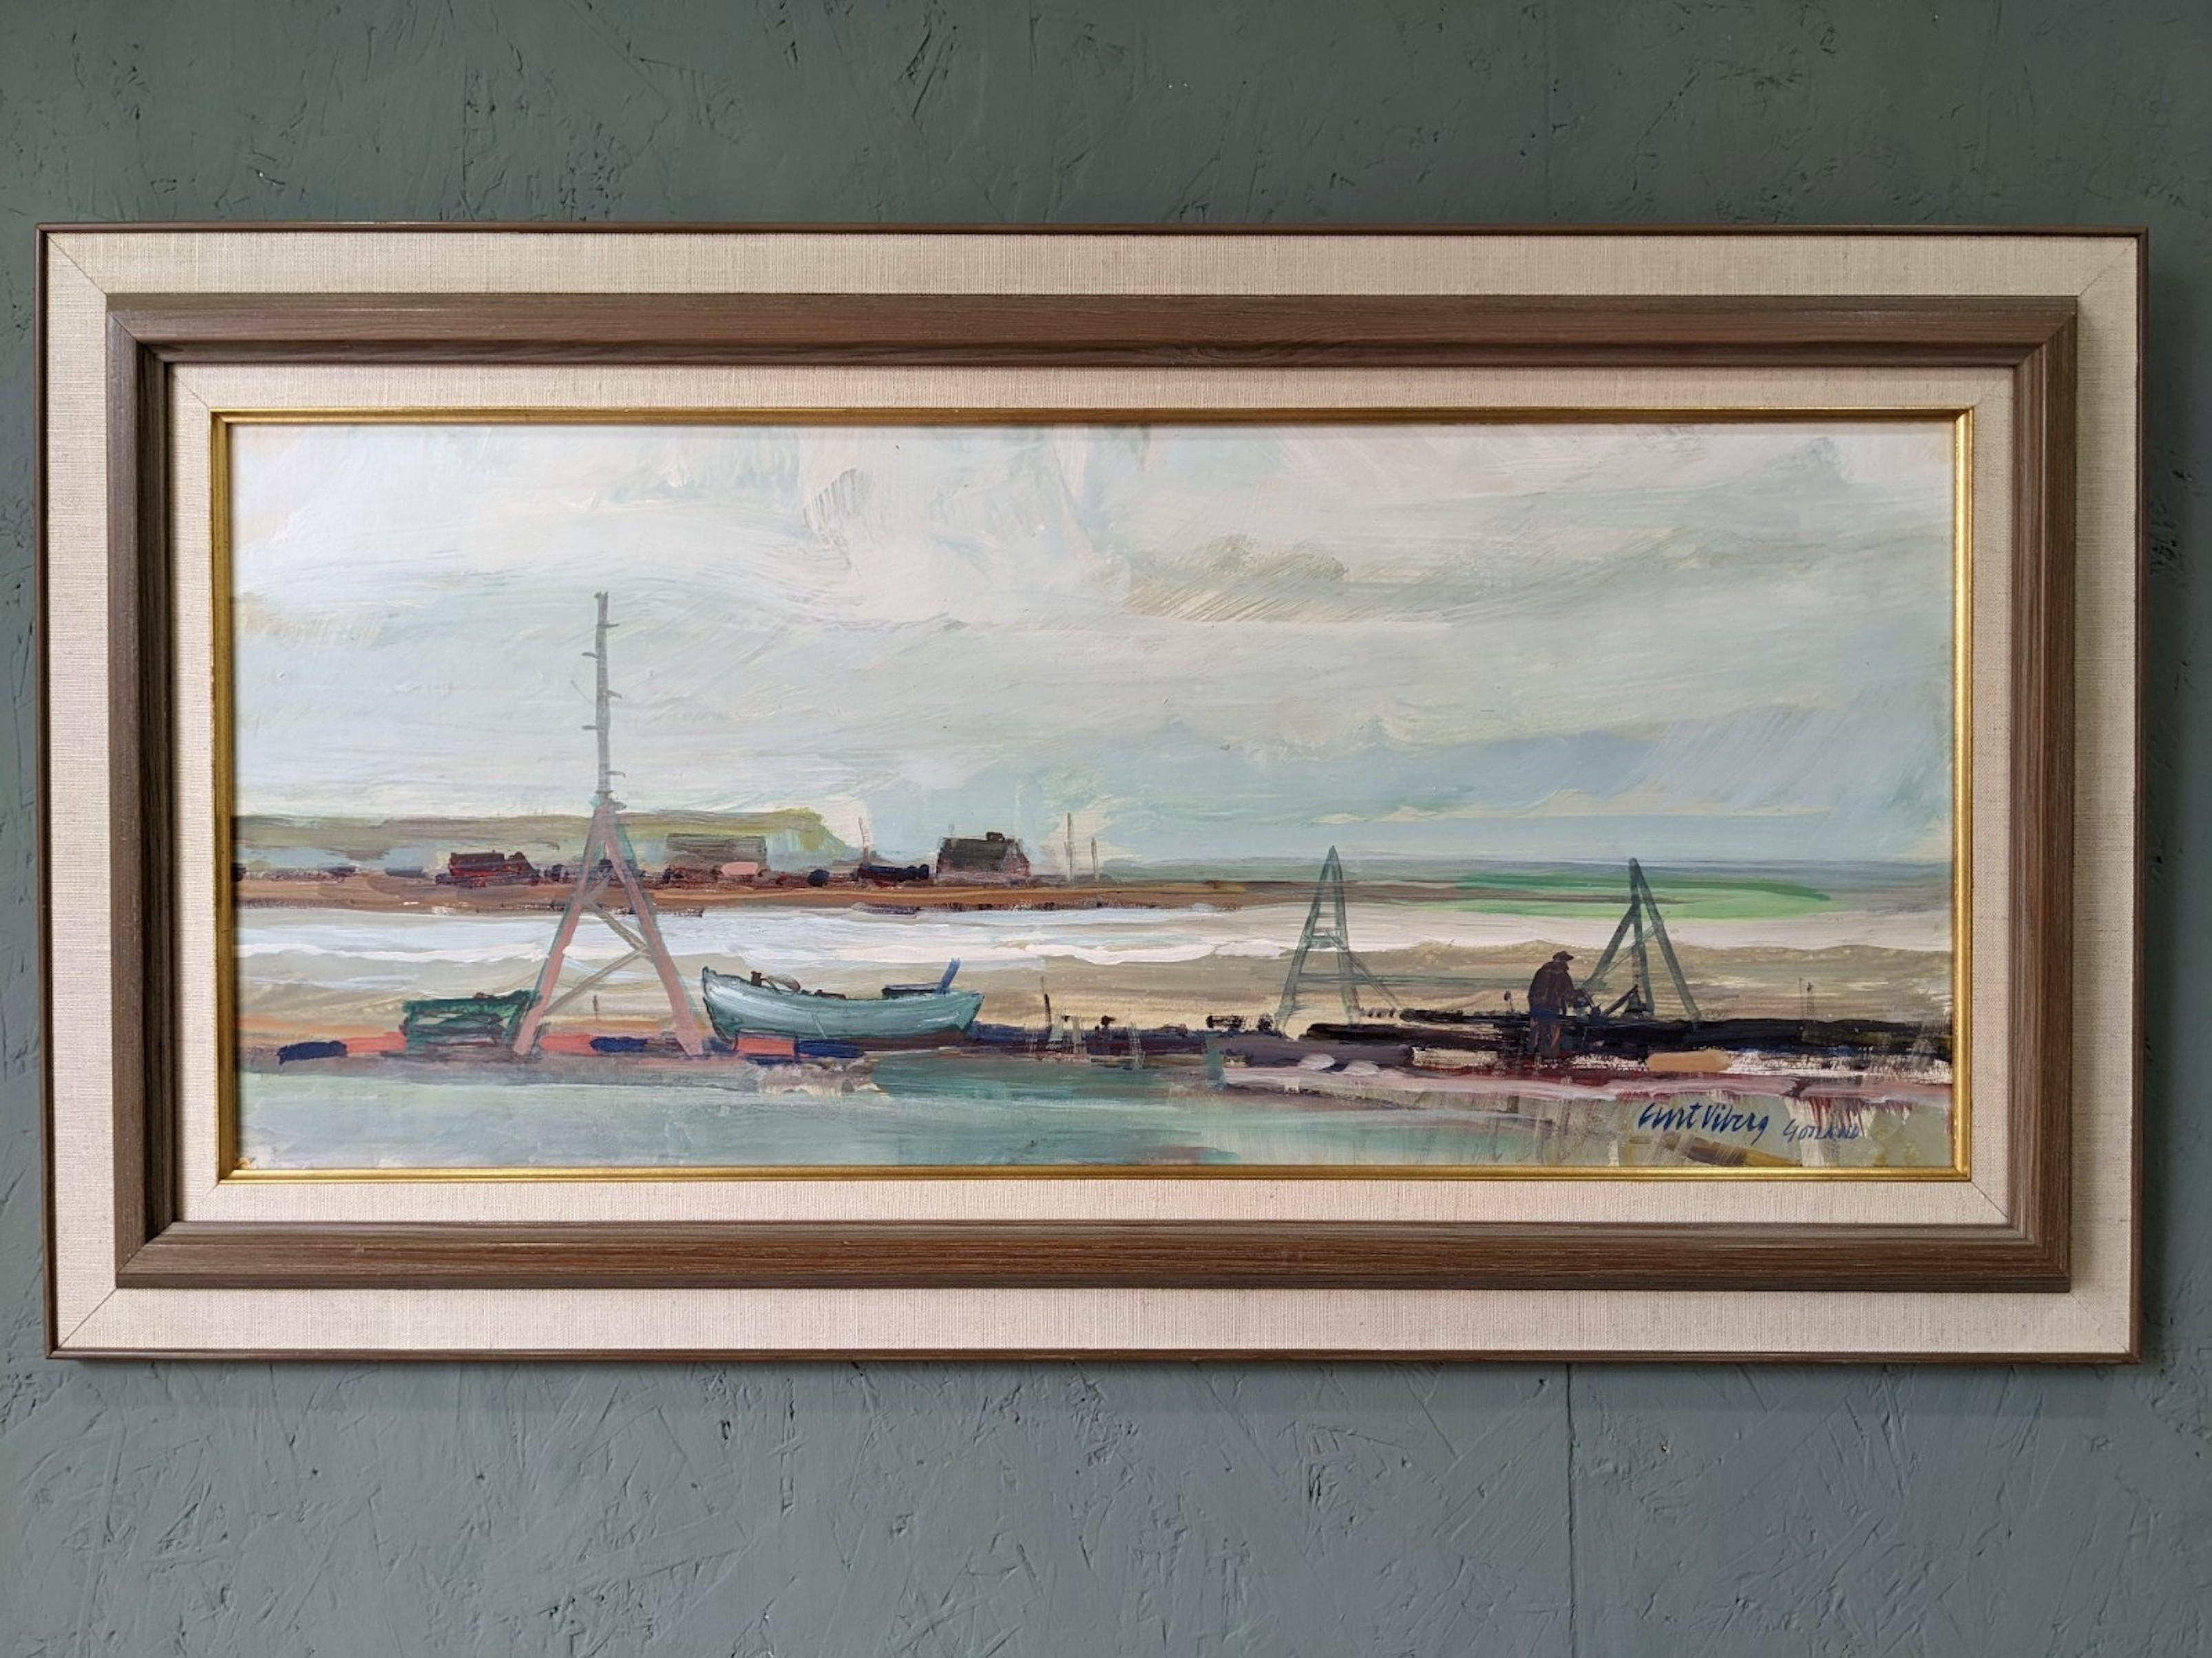 GOTLAND
Size: 46 x 85 cm (including frame)
Oil on Board

A tranquil and delicately detailed oil painting depicting a coastal town of Gotland, an island in Sweden.

Through the use of a restrained light colour palette primarily consisting of green